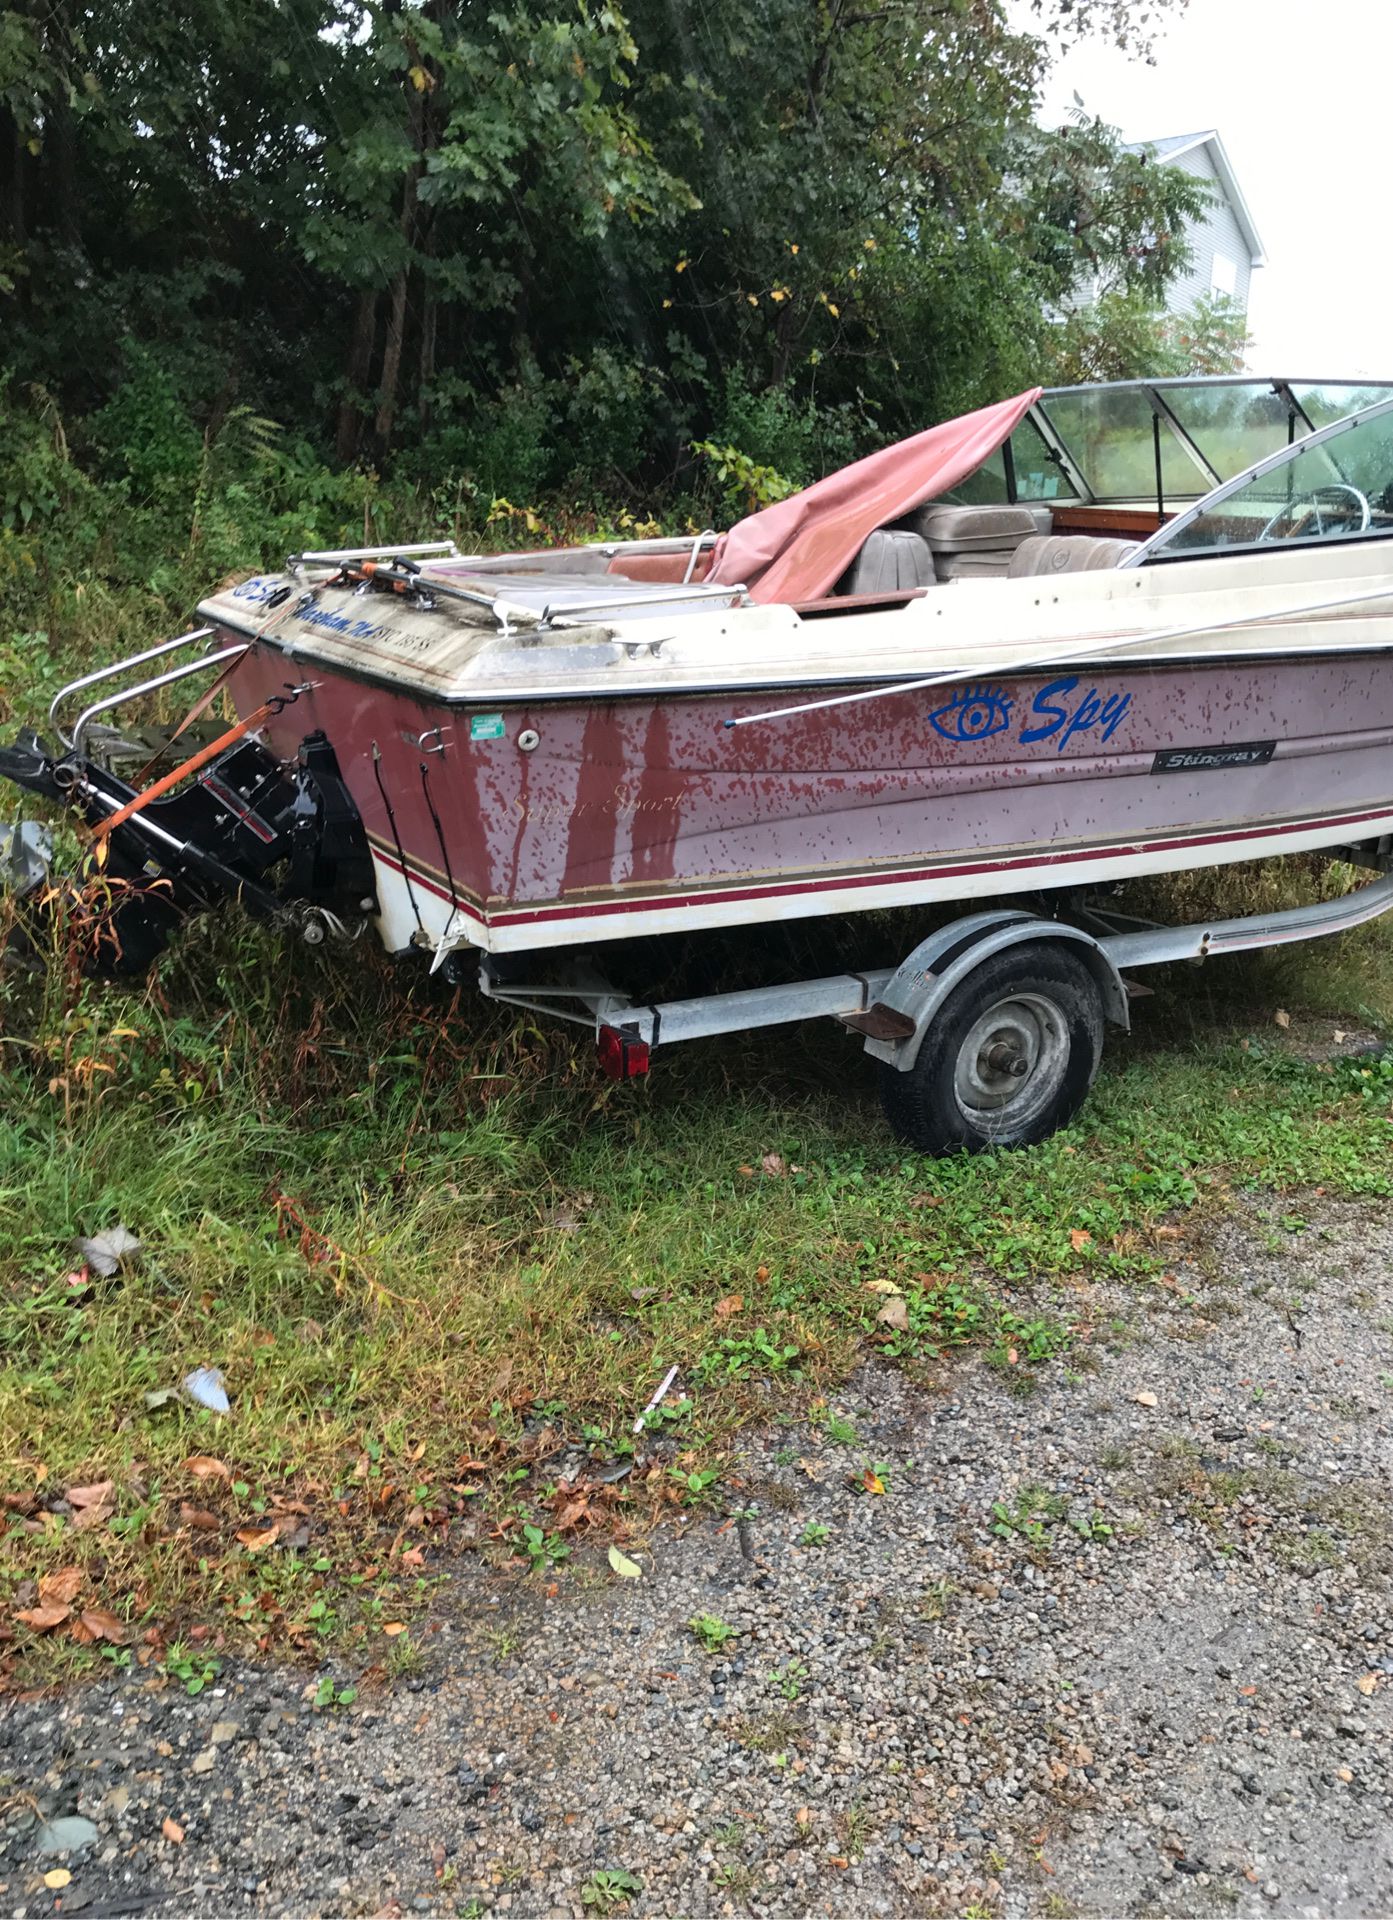 1998 stingray inboard outboard motor great boat trailer and all